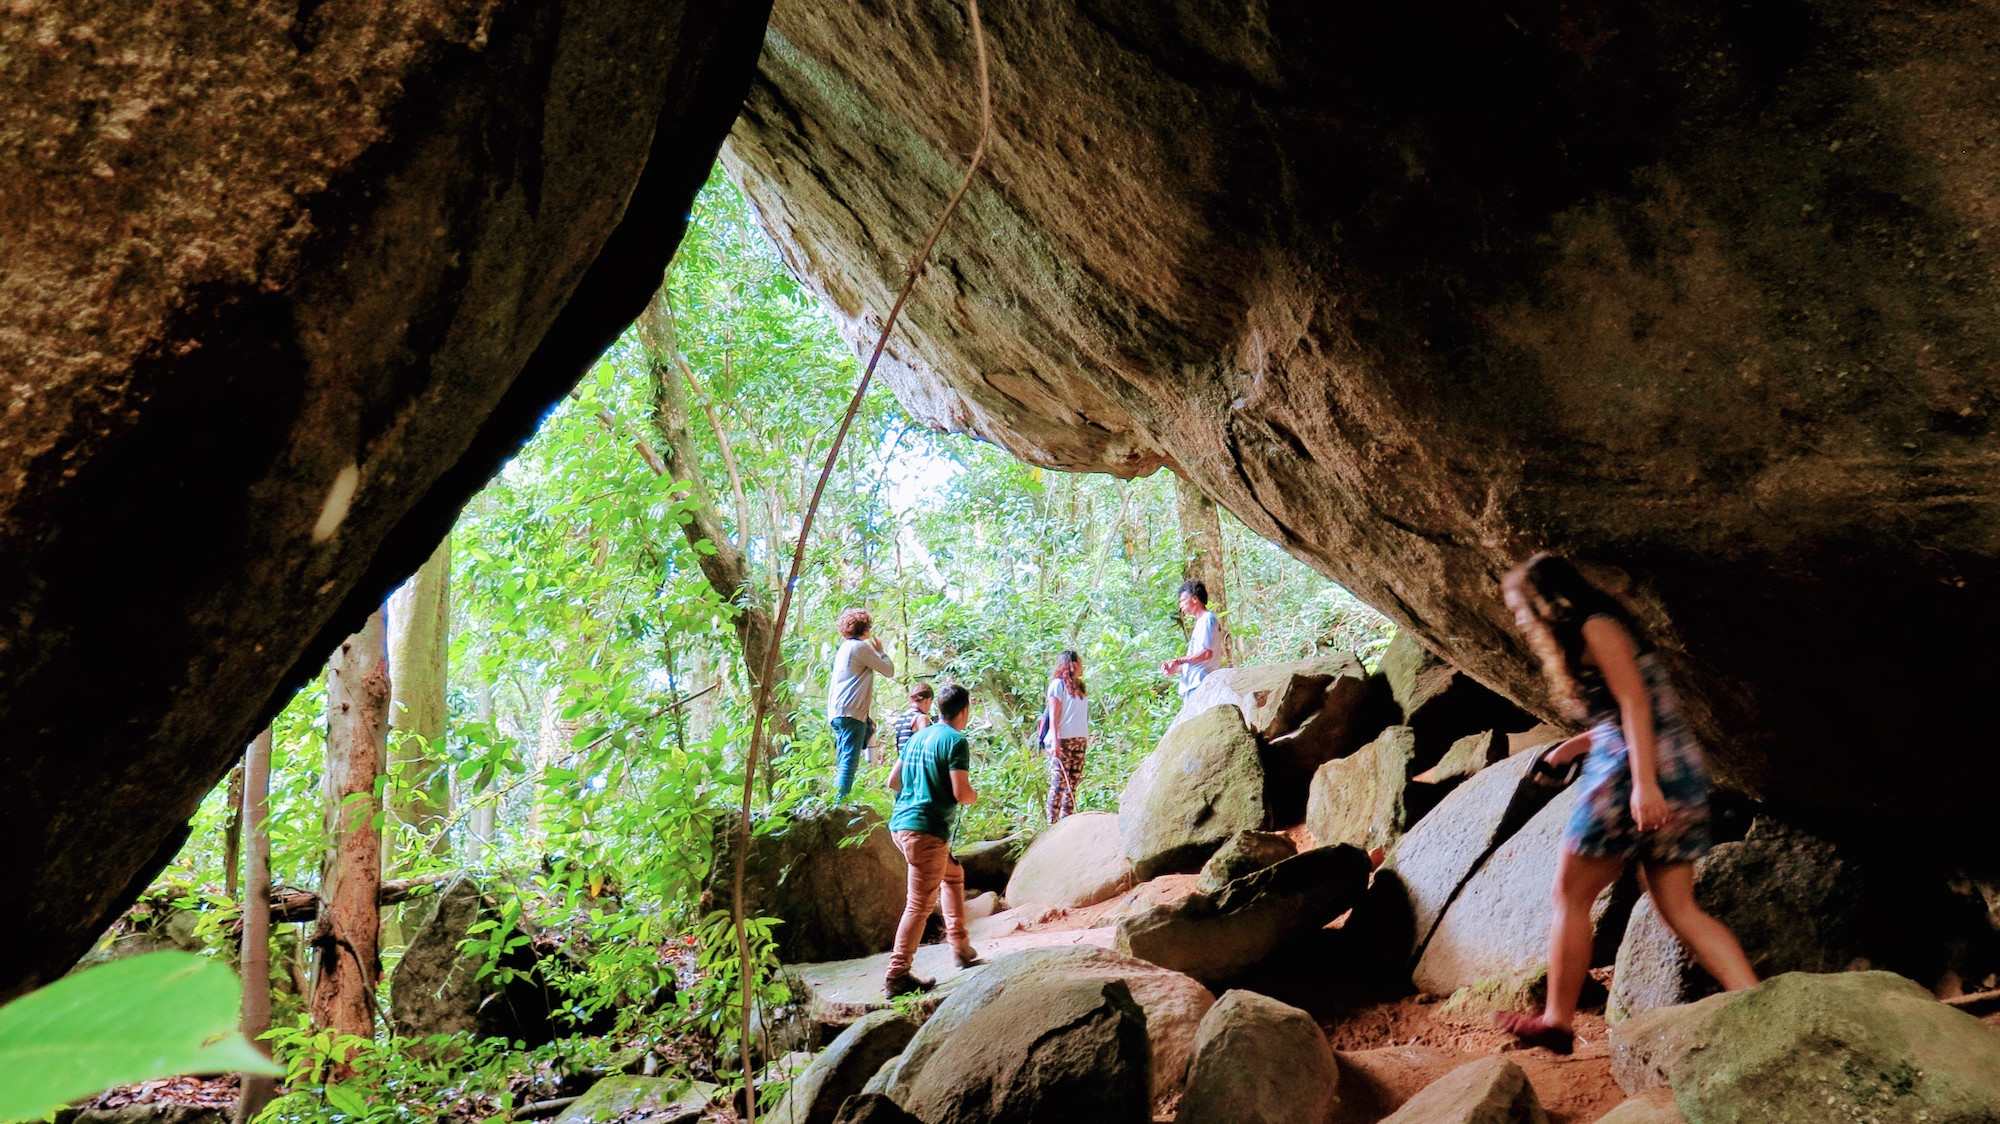 SFN members visit the caves and grottos of the quilombo